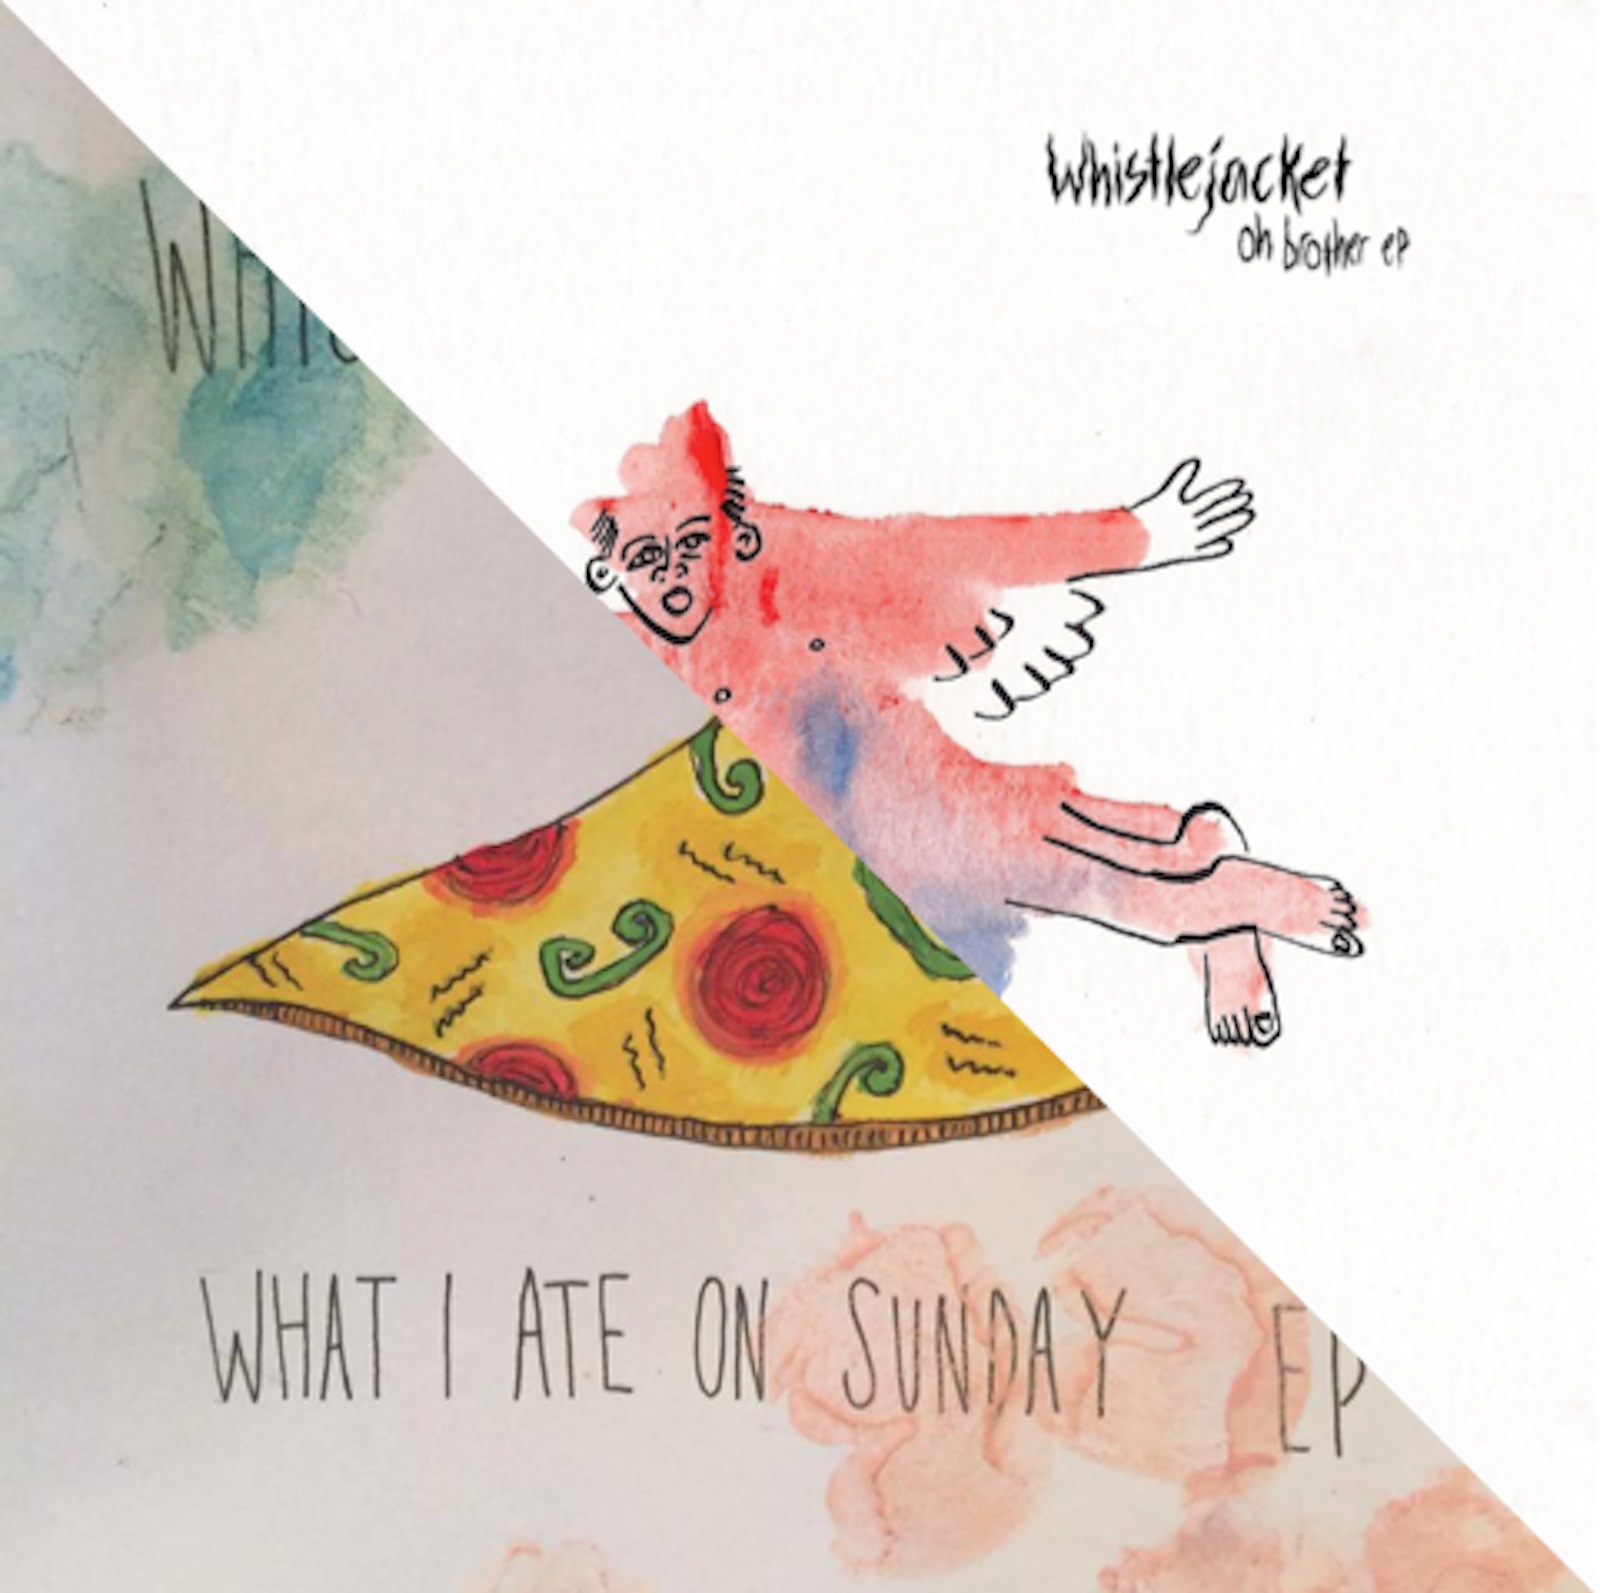 Oh Brother EP + What I Ate On Sunday EP - Whistlejacket